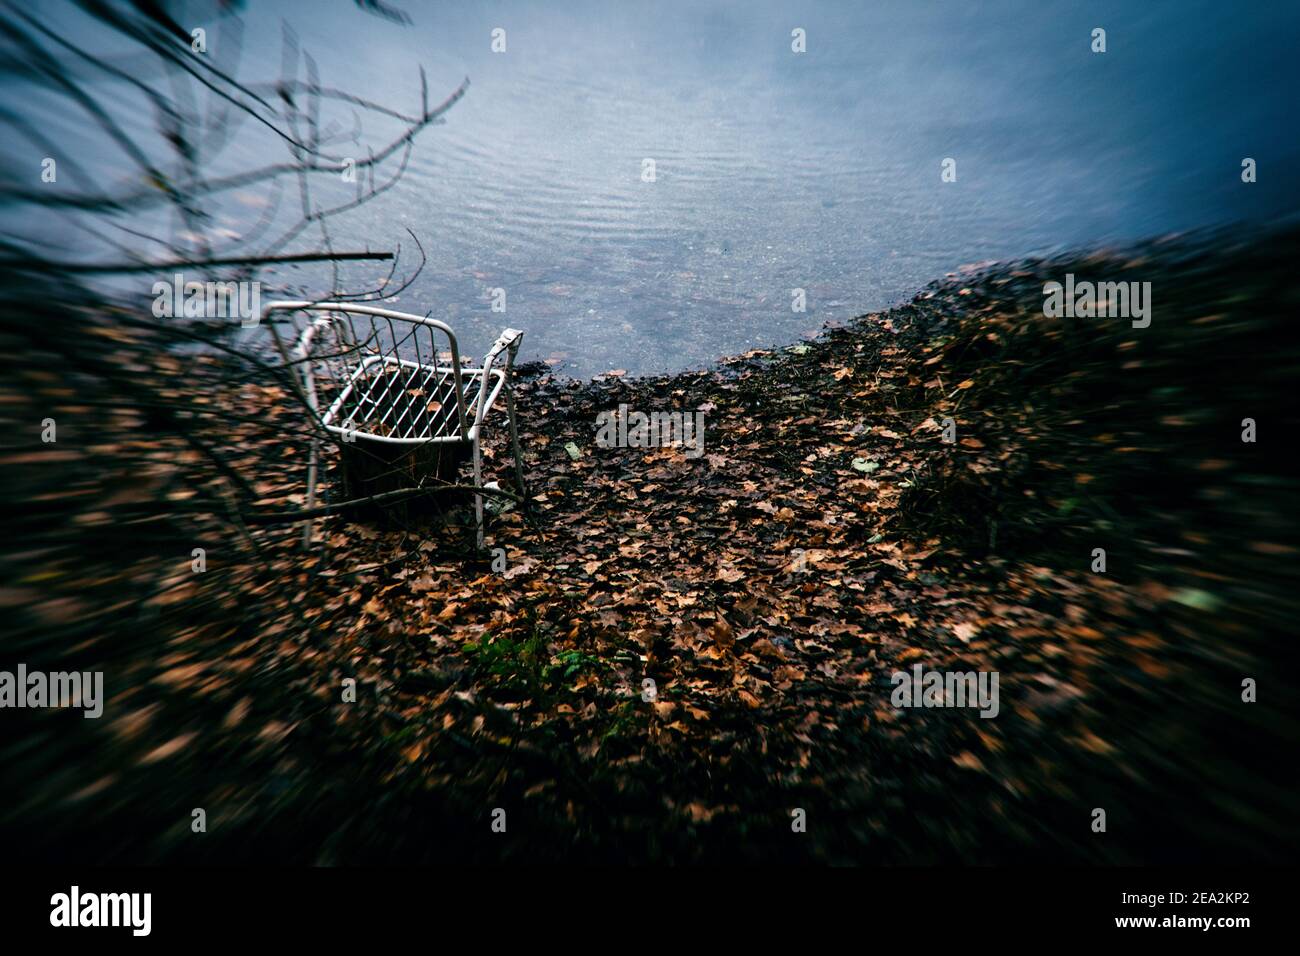 Wedtlenstedt, Germany. 11th Dec, 2020. An old garden chair stands in wilted leaves on the shore of a hidden fishing pond. (Image was manipulated by means of software) Credit: Stefan Jaitner/dpa/Alamy Live News Stock Photo